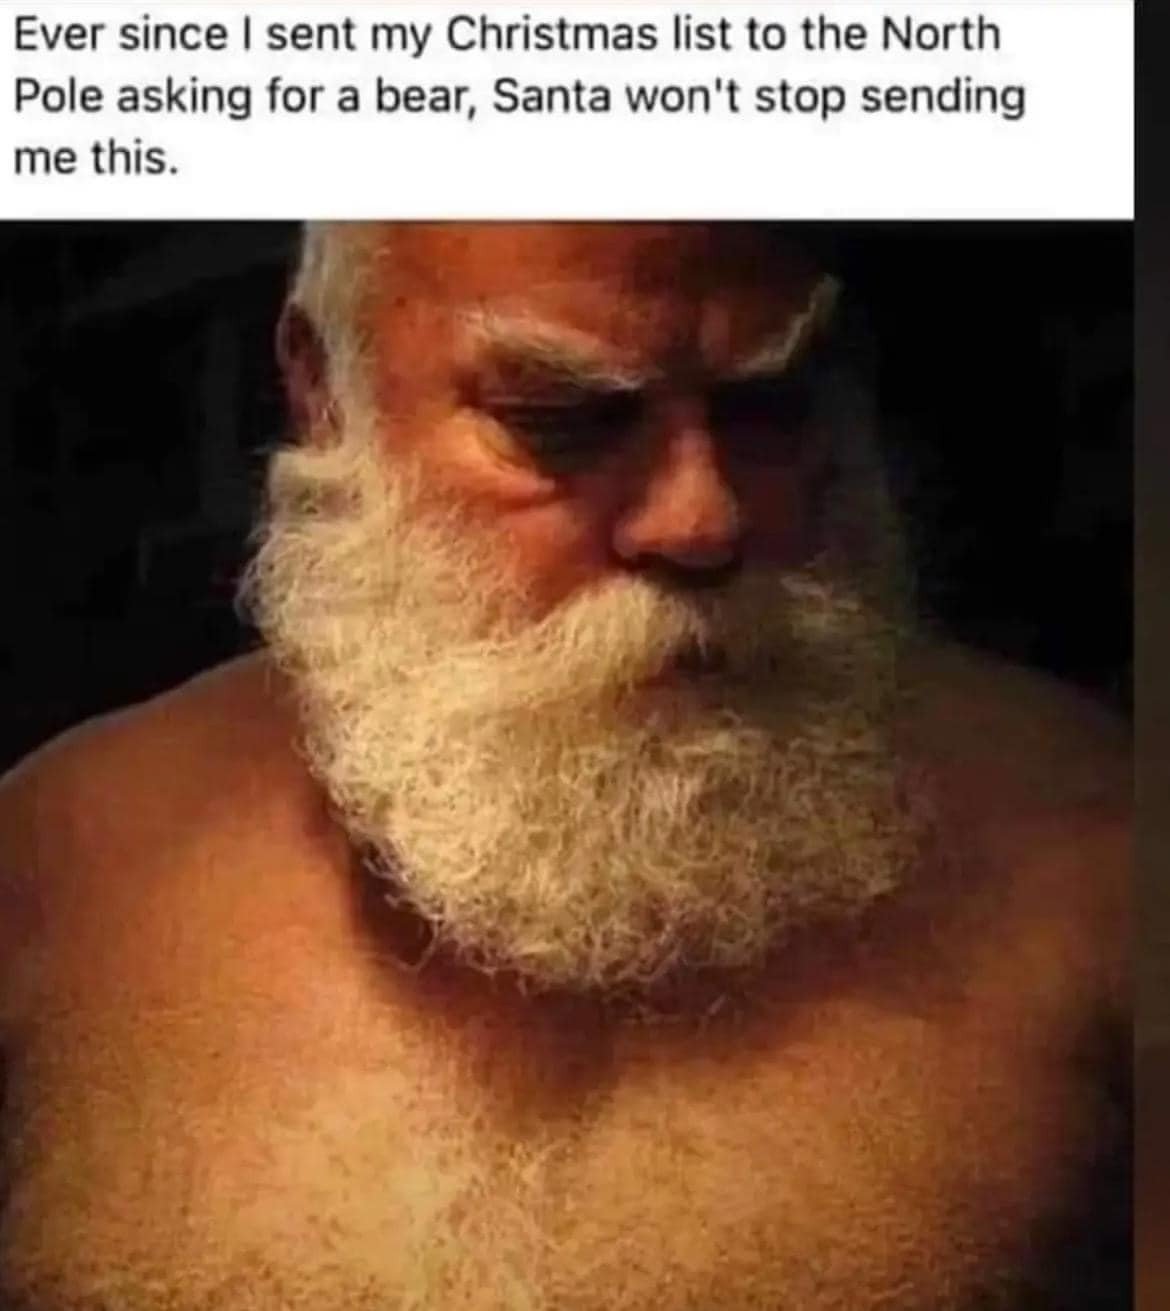 Watch the Photo by DirtyDaddyFunStuff with the username @DirtyDaddyPorn, who is a verified user, posted on January 7, 2024 and the text says '#hairy #muscles #beards #bears #santa #christmas #shaving #stubble'